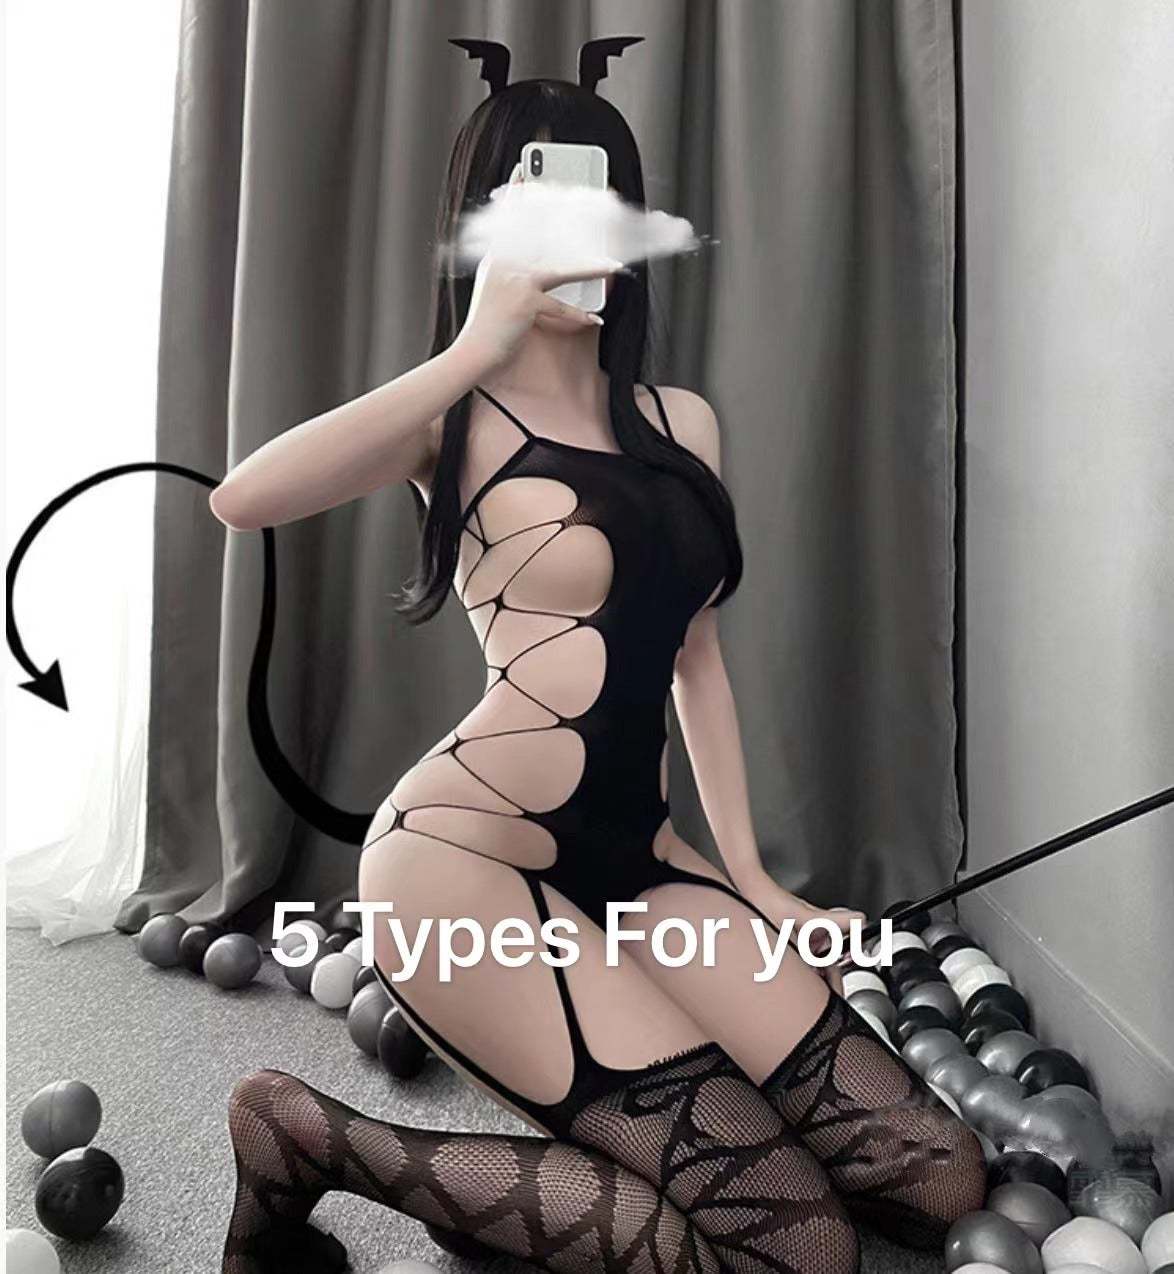 Sexy Lingerie 5 Types Teddies Bodysuit Erotic Outfit Open Crotch Stretch Mesh